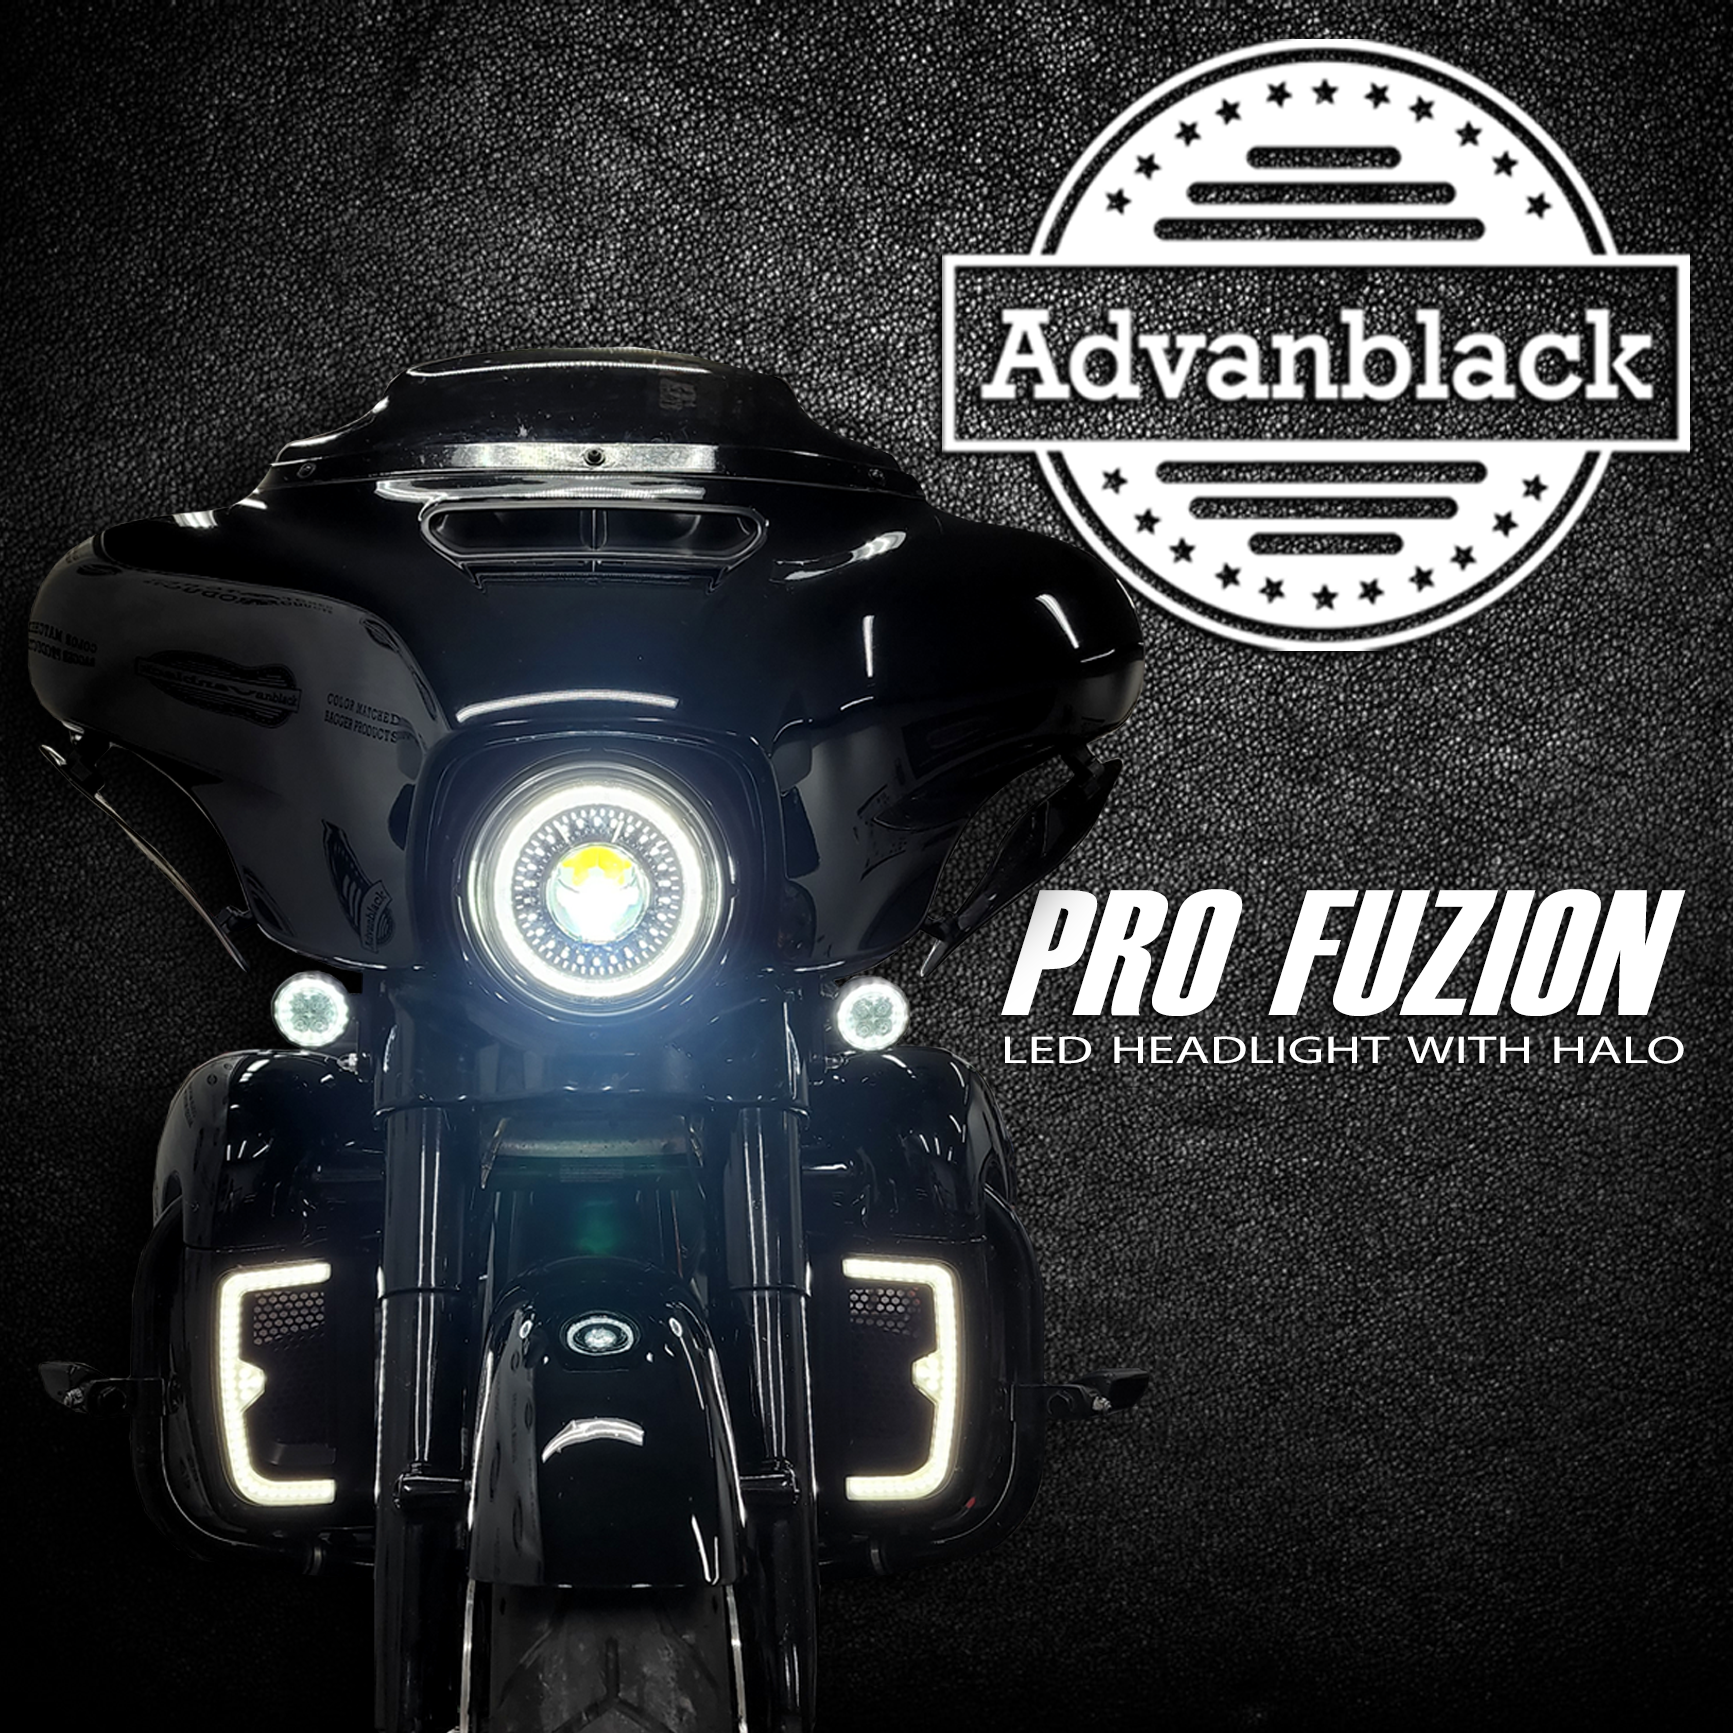 Upgrade to the best LED bike lights for riding at night (and day!)